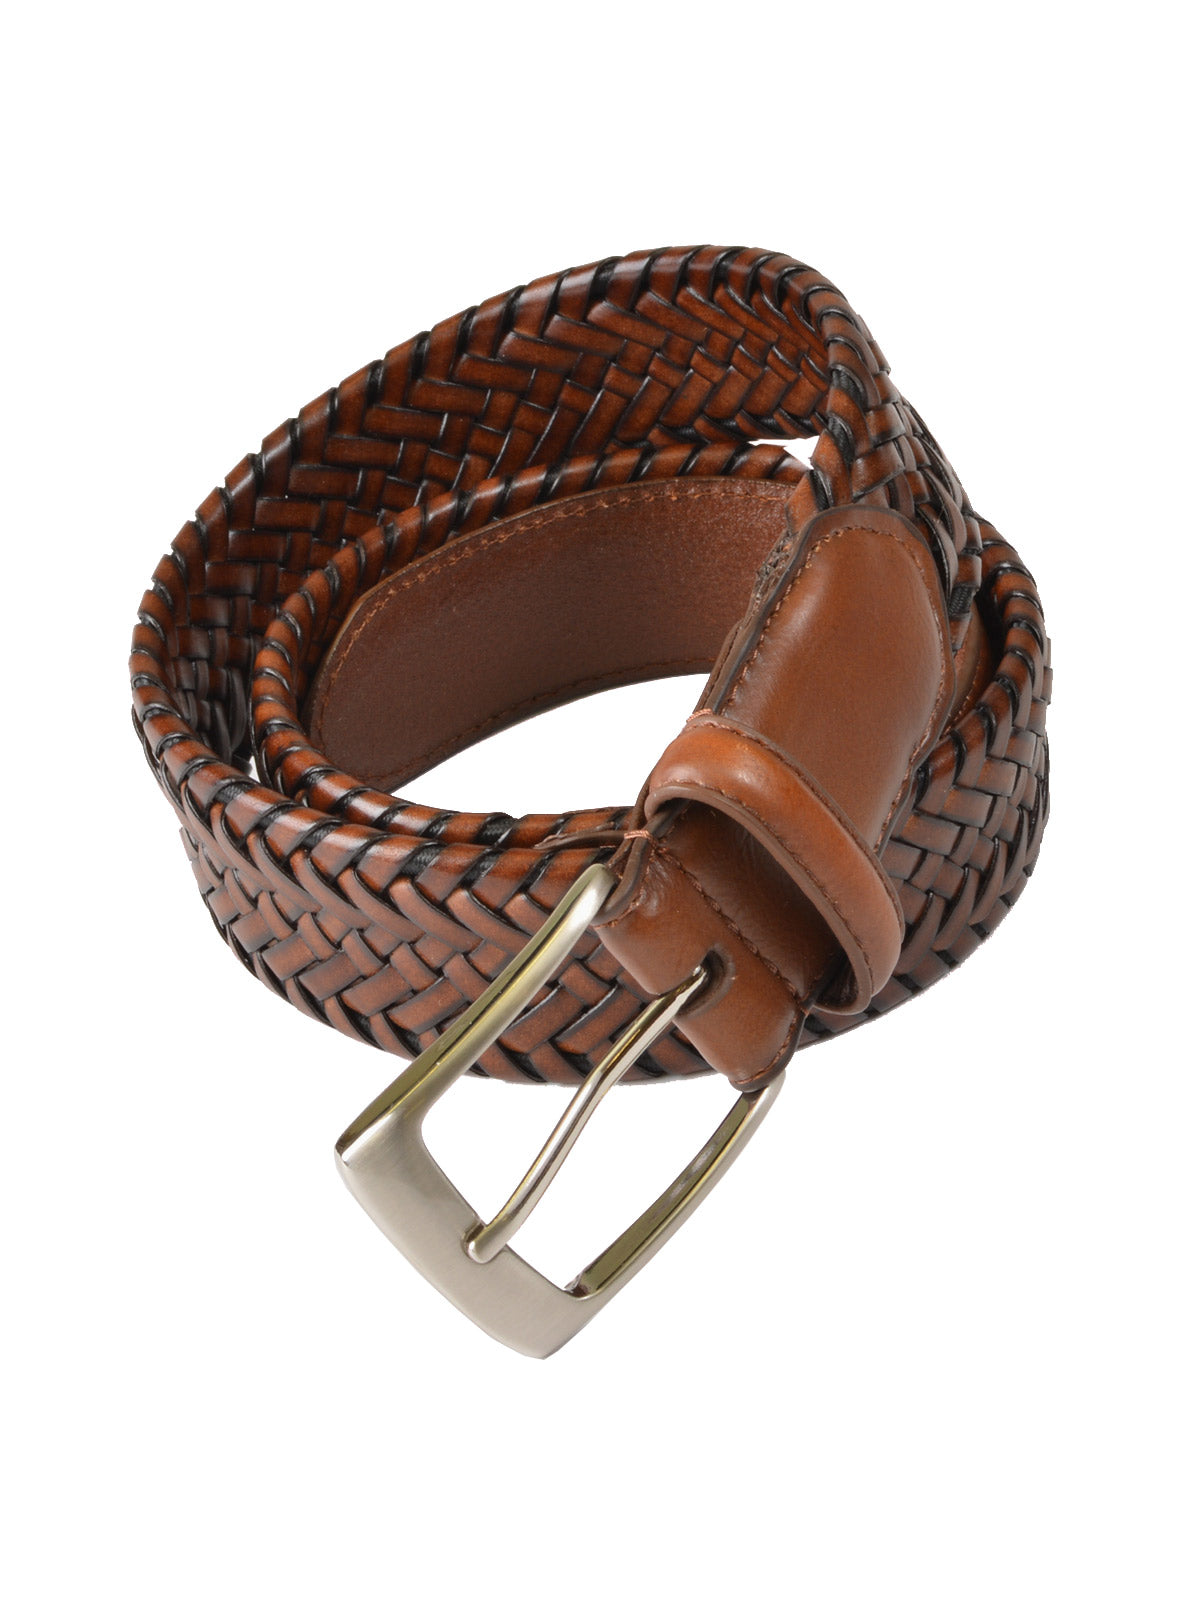 Outfitter Genuine Leather Braided Stretch Belts in Tan - Regular Sizes